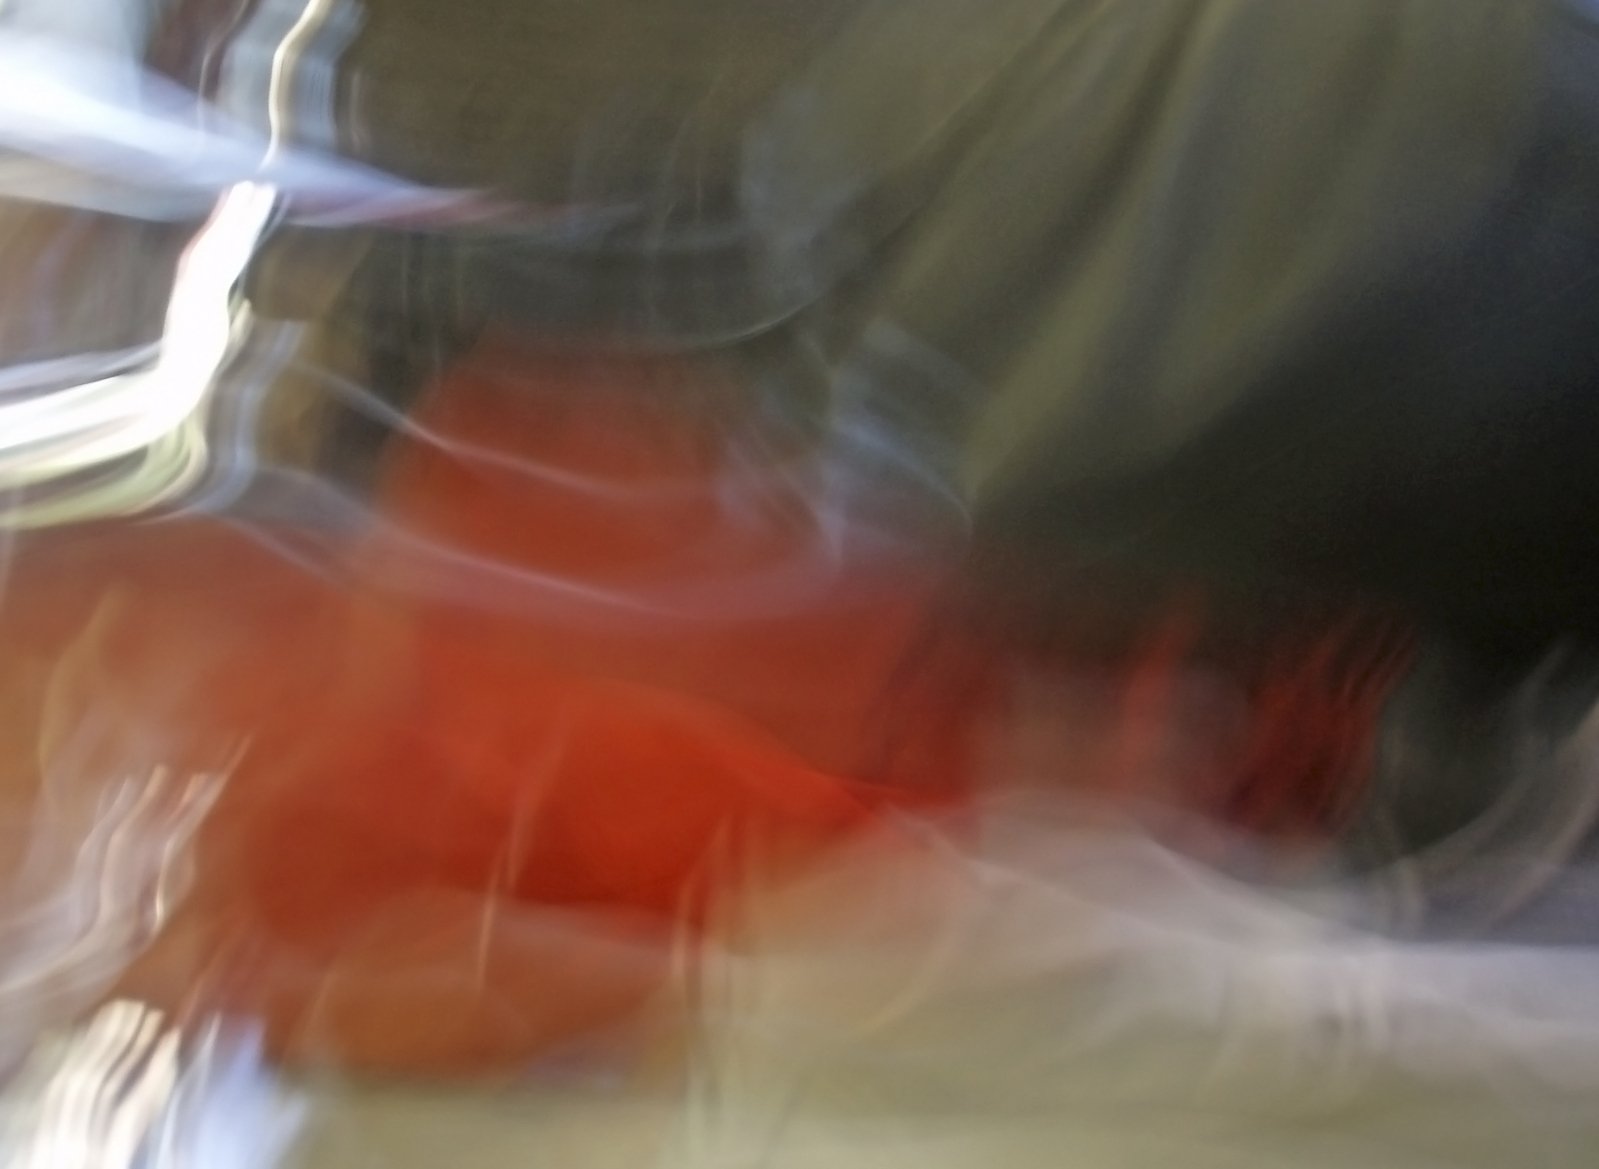 blurred image of someone wearing a red shirt riding a motorcycle